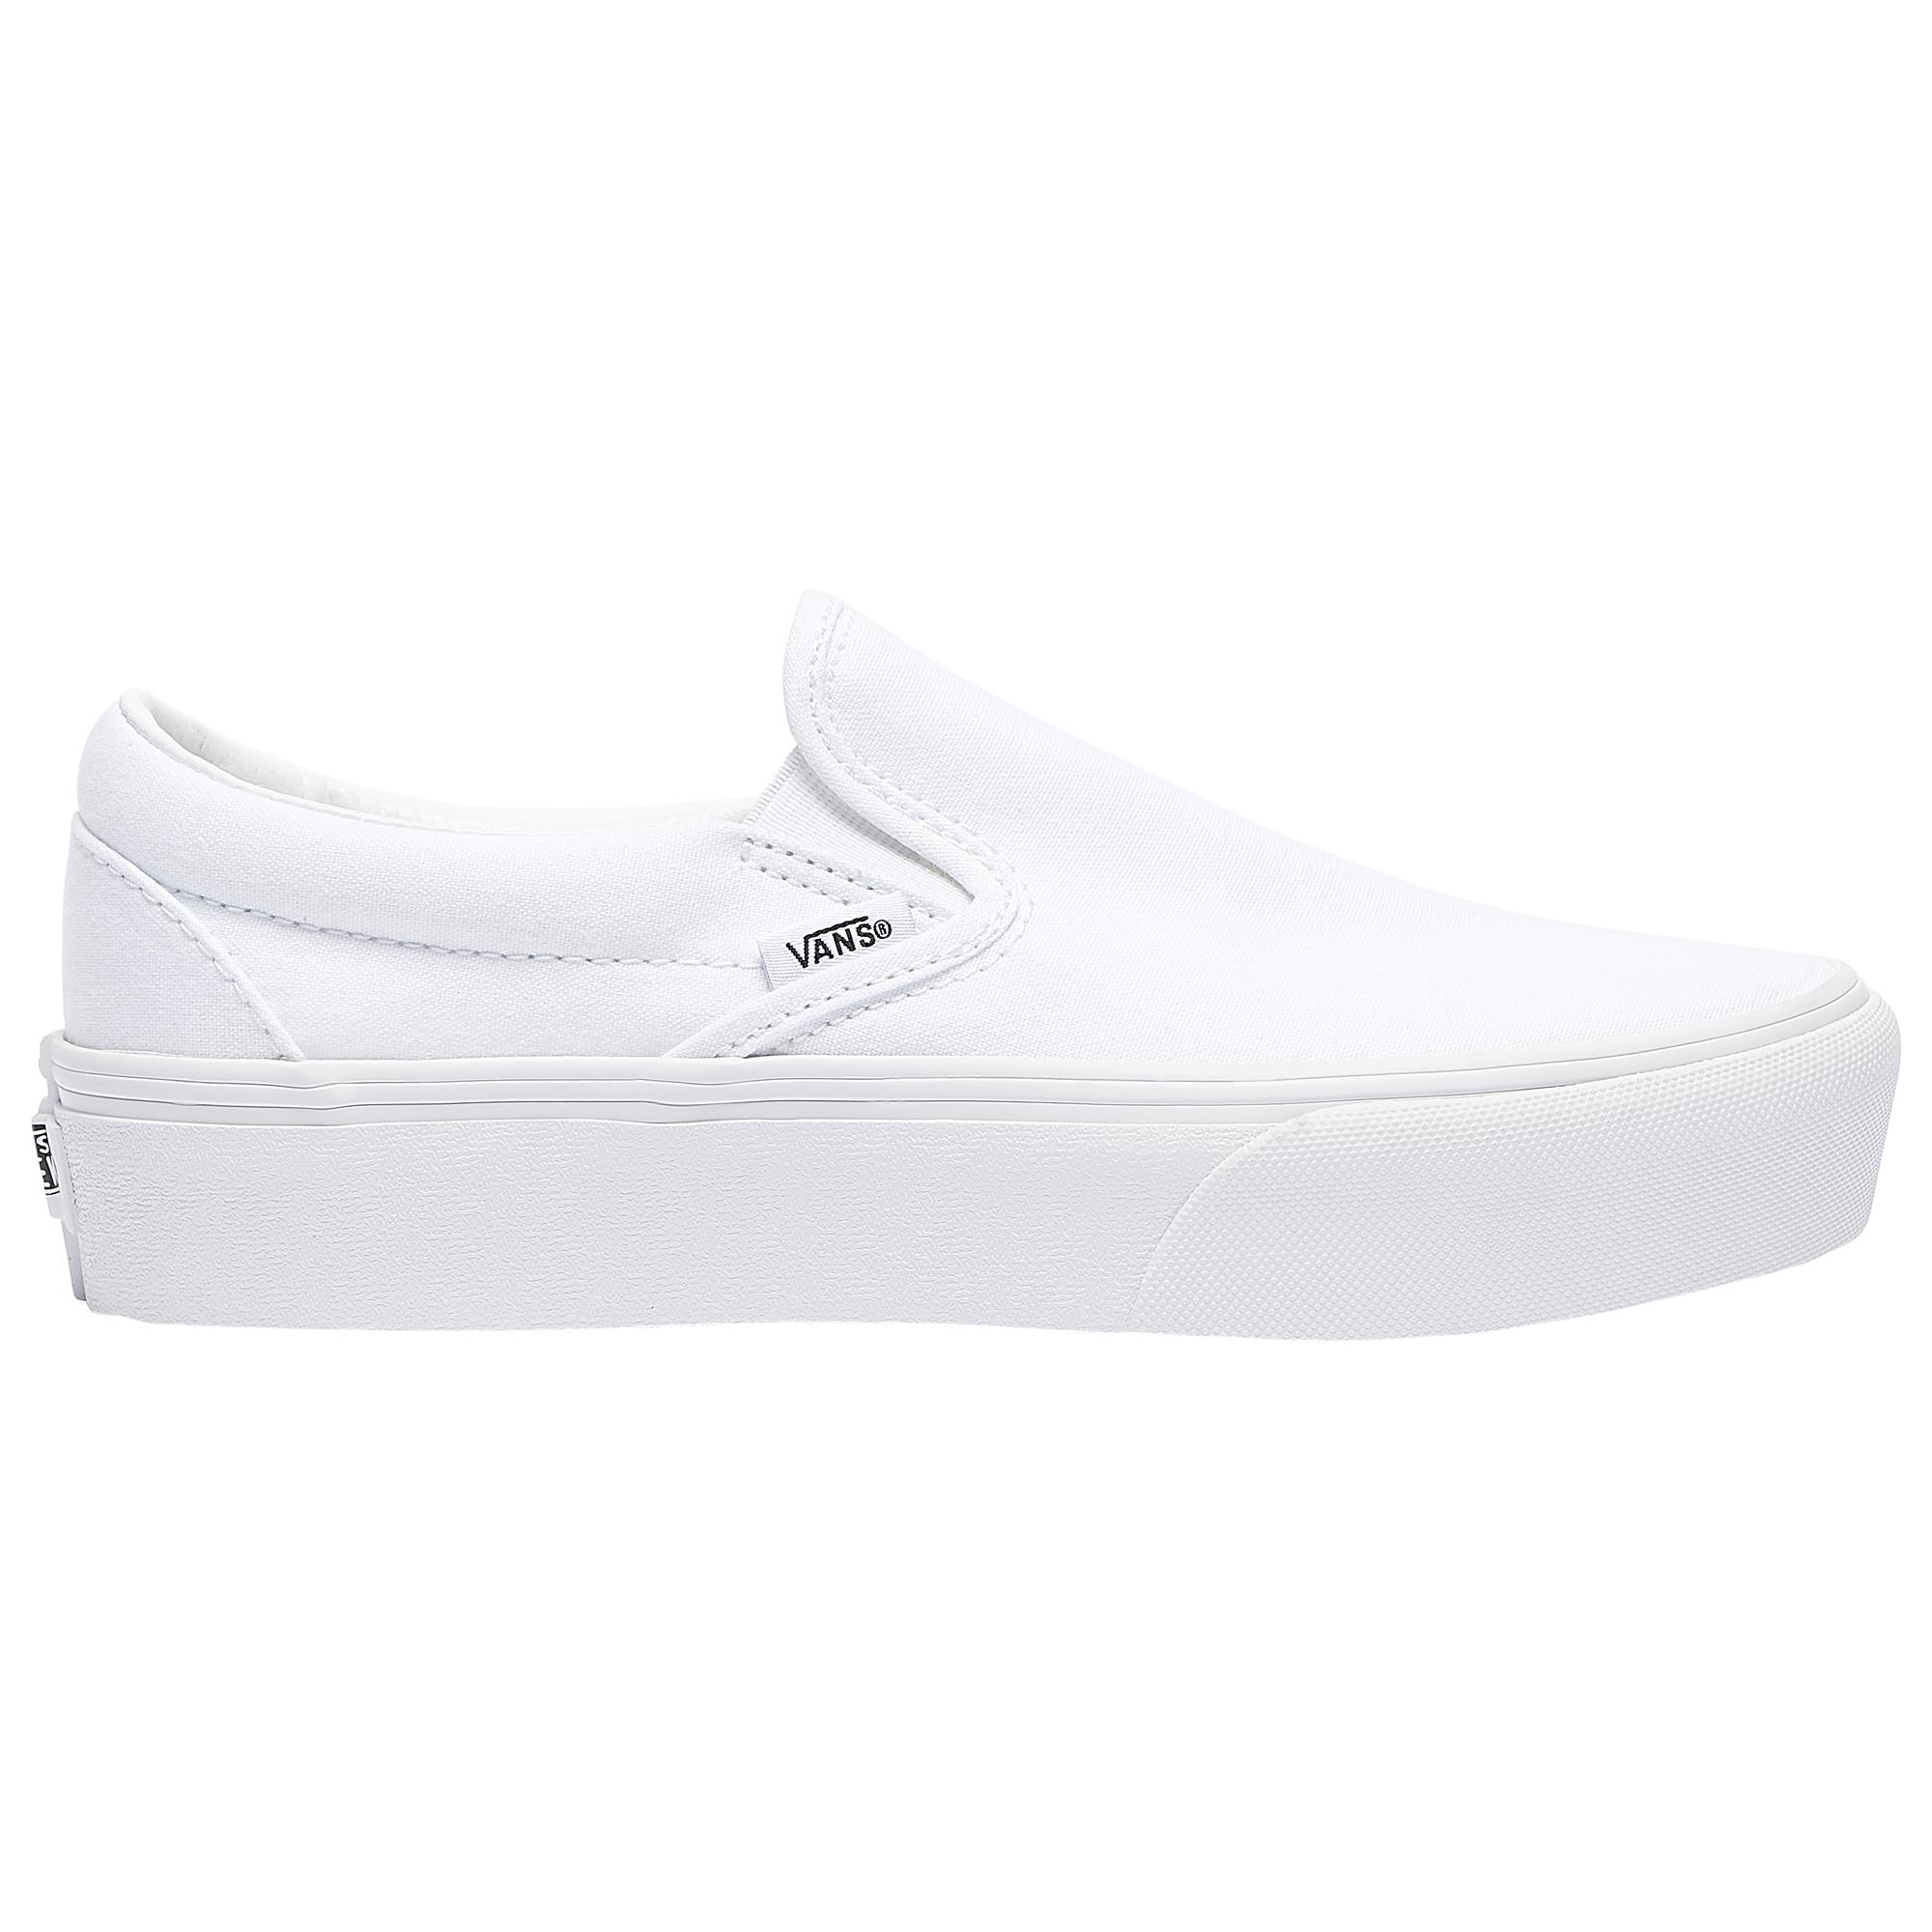 Vans Canvas Classic Slip-on Platform - Shoes in White - Lyst